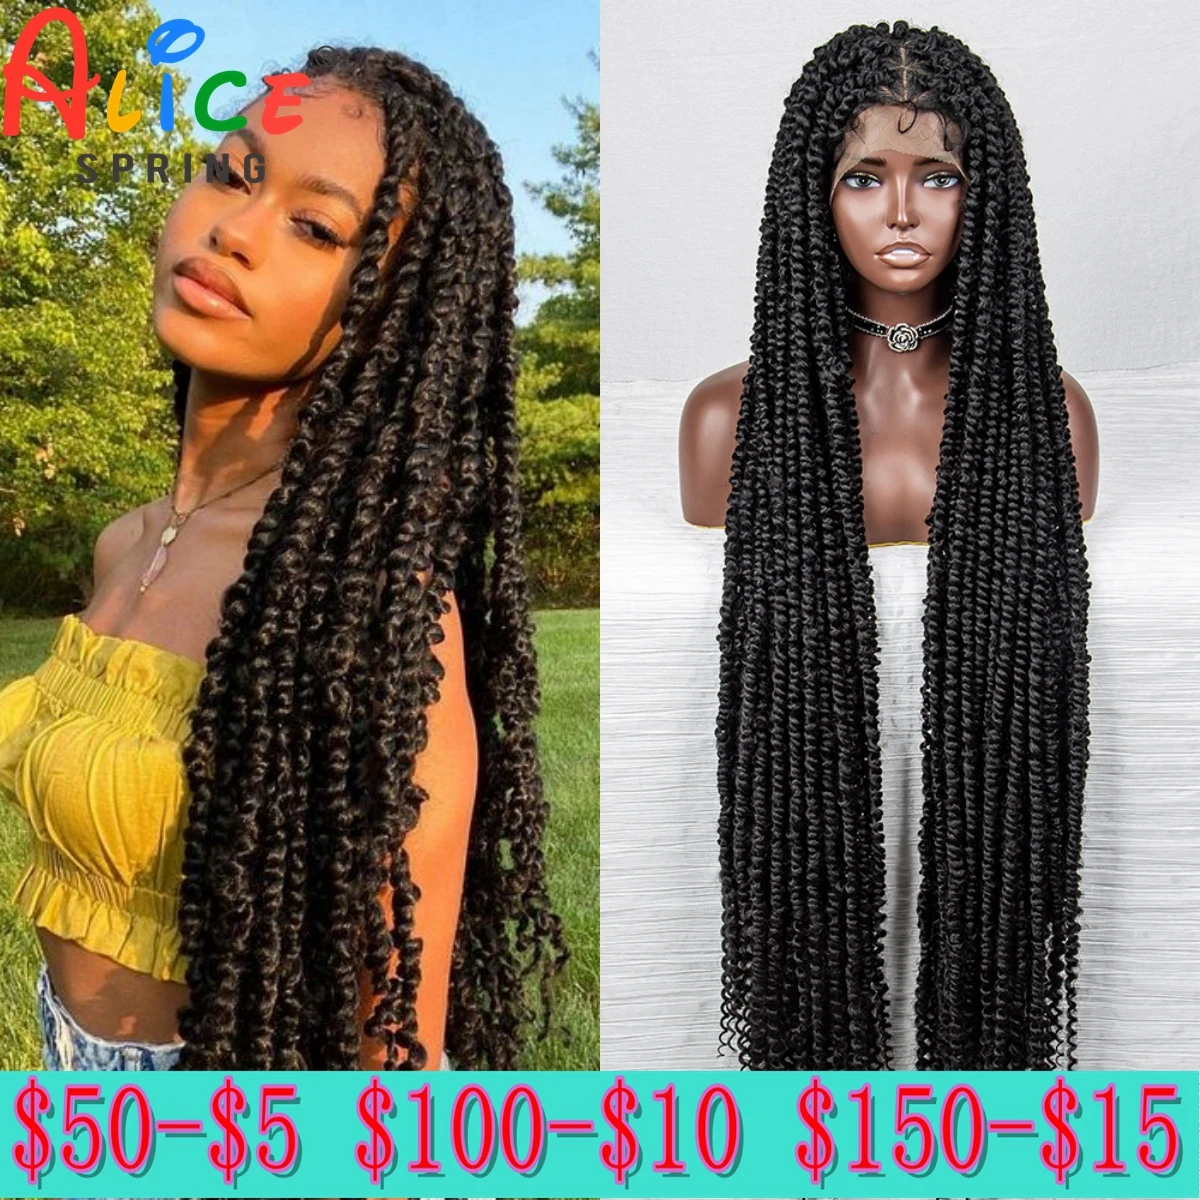 

40 Inches Braided Wigs Synthetic Full Lace Front Wigs for Black Women Knotless Box Braded Wigs Synthetic Full Lace Front Wigs